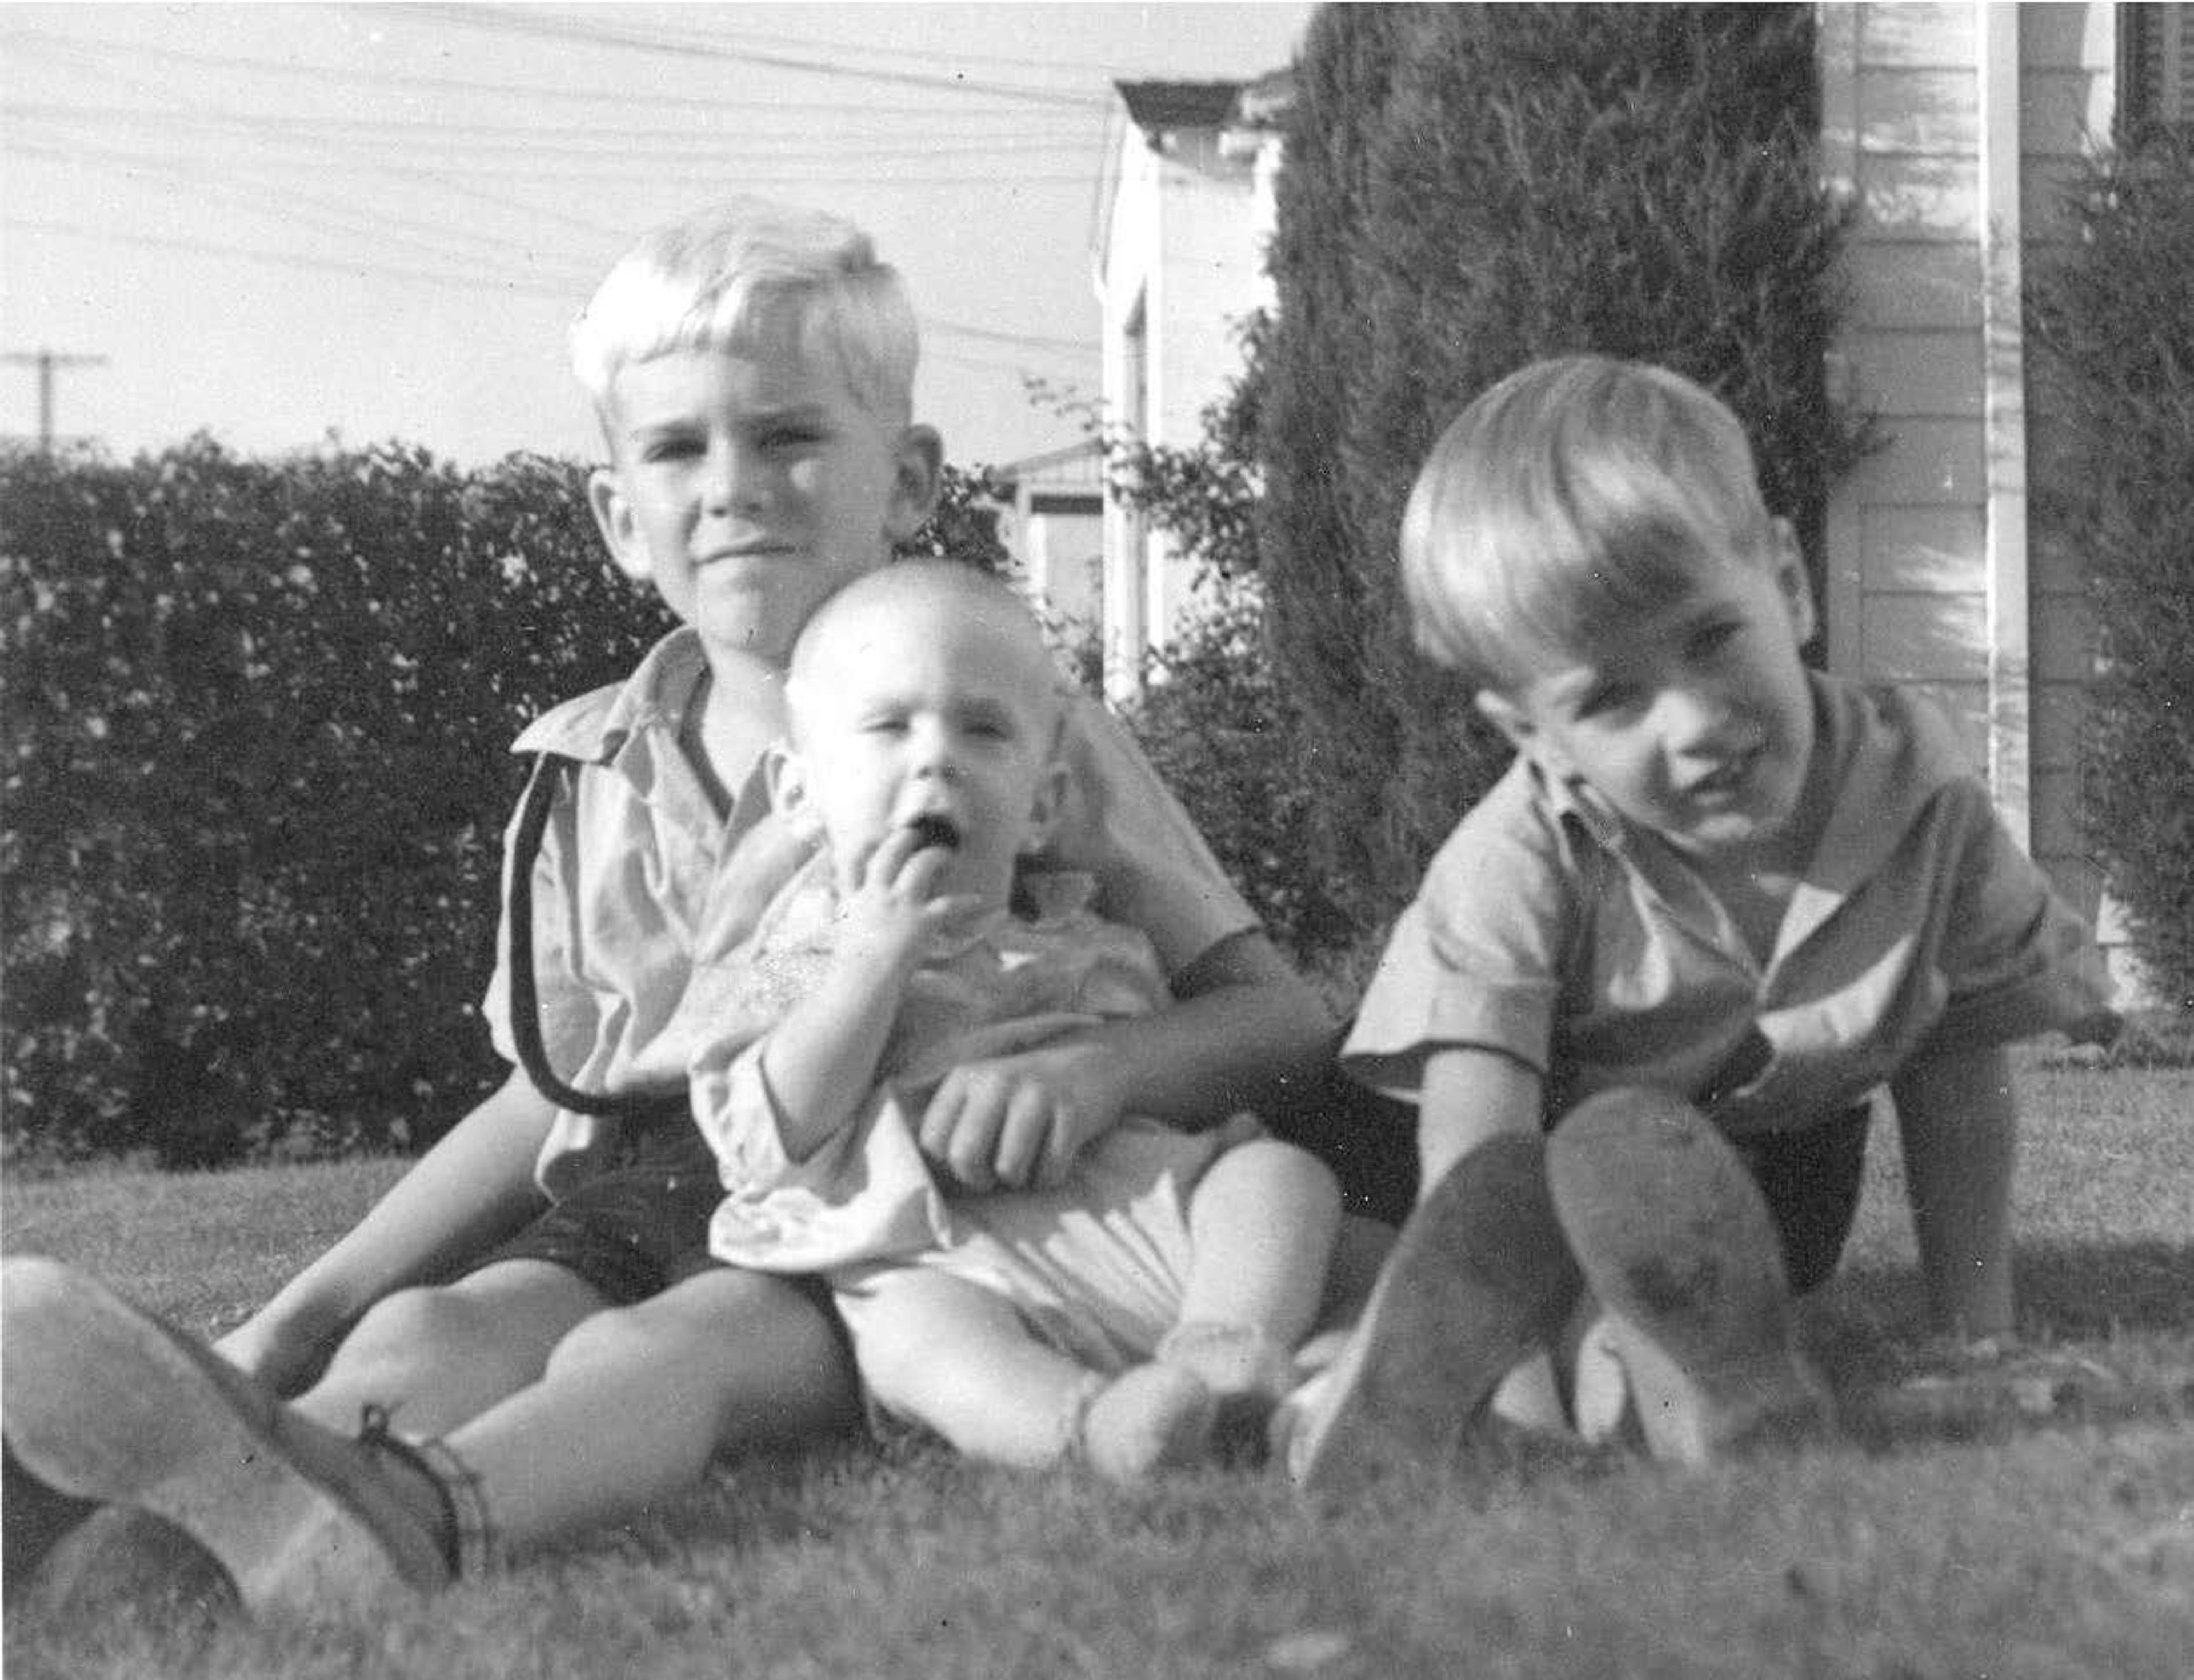 My brothers Bruce and Paul with me on the right in the mid-1940s.